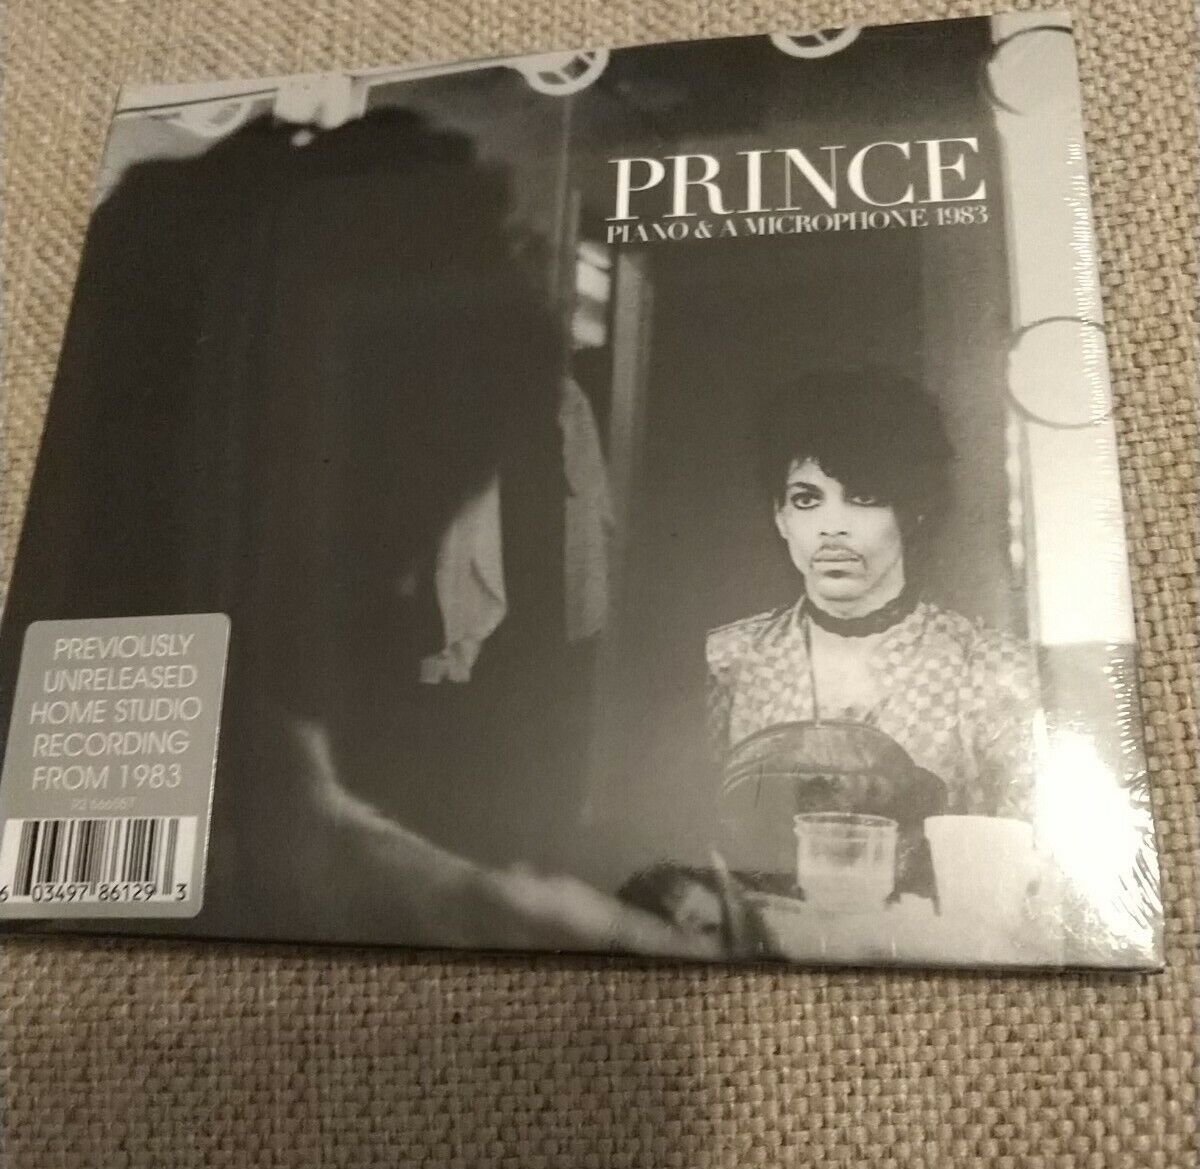 PRINCE: Piano & A Microphone 1983 (CD, 2018) Previous Unreleased Home Recordings